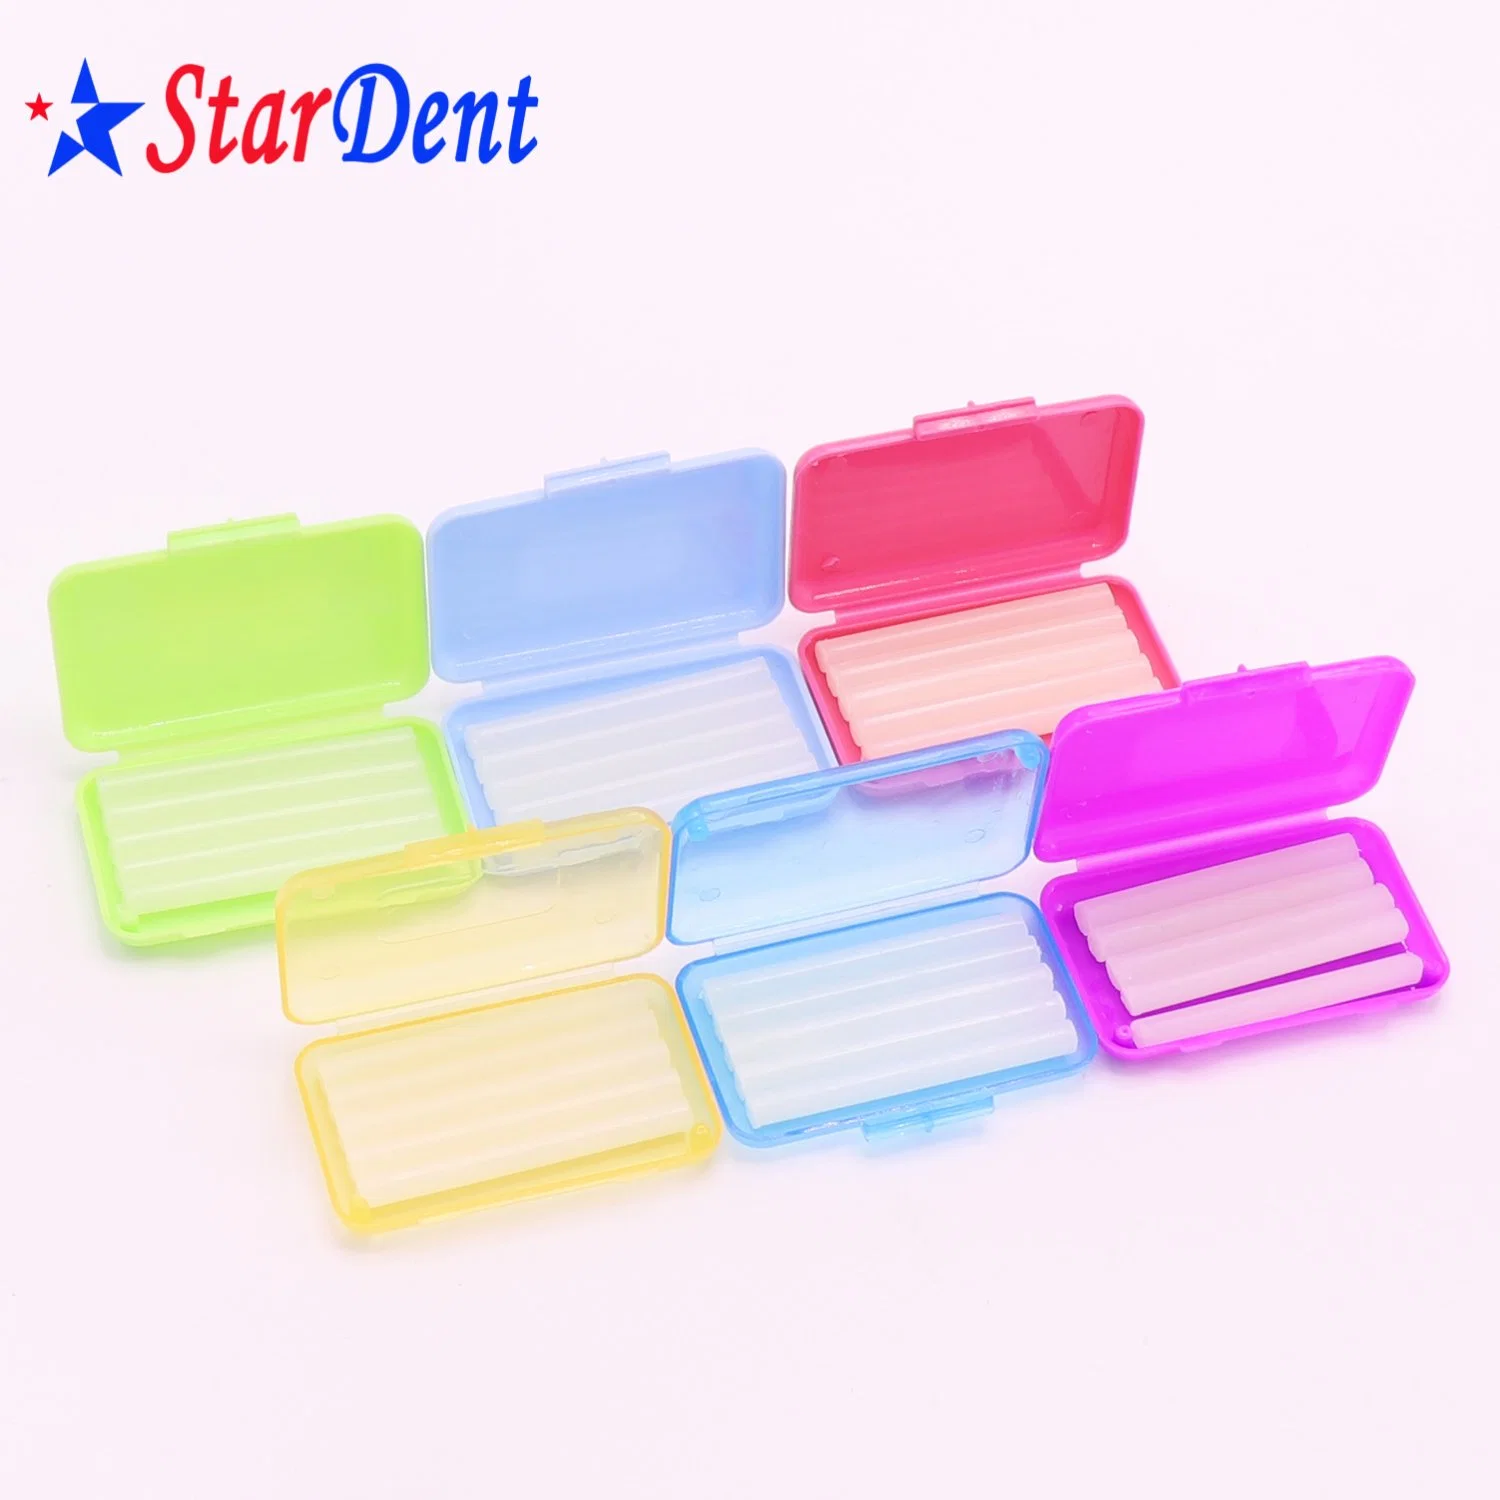 5 Wax Strips Orthodontic Dental Wax/Disposable Product